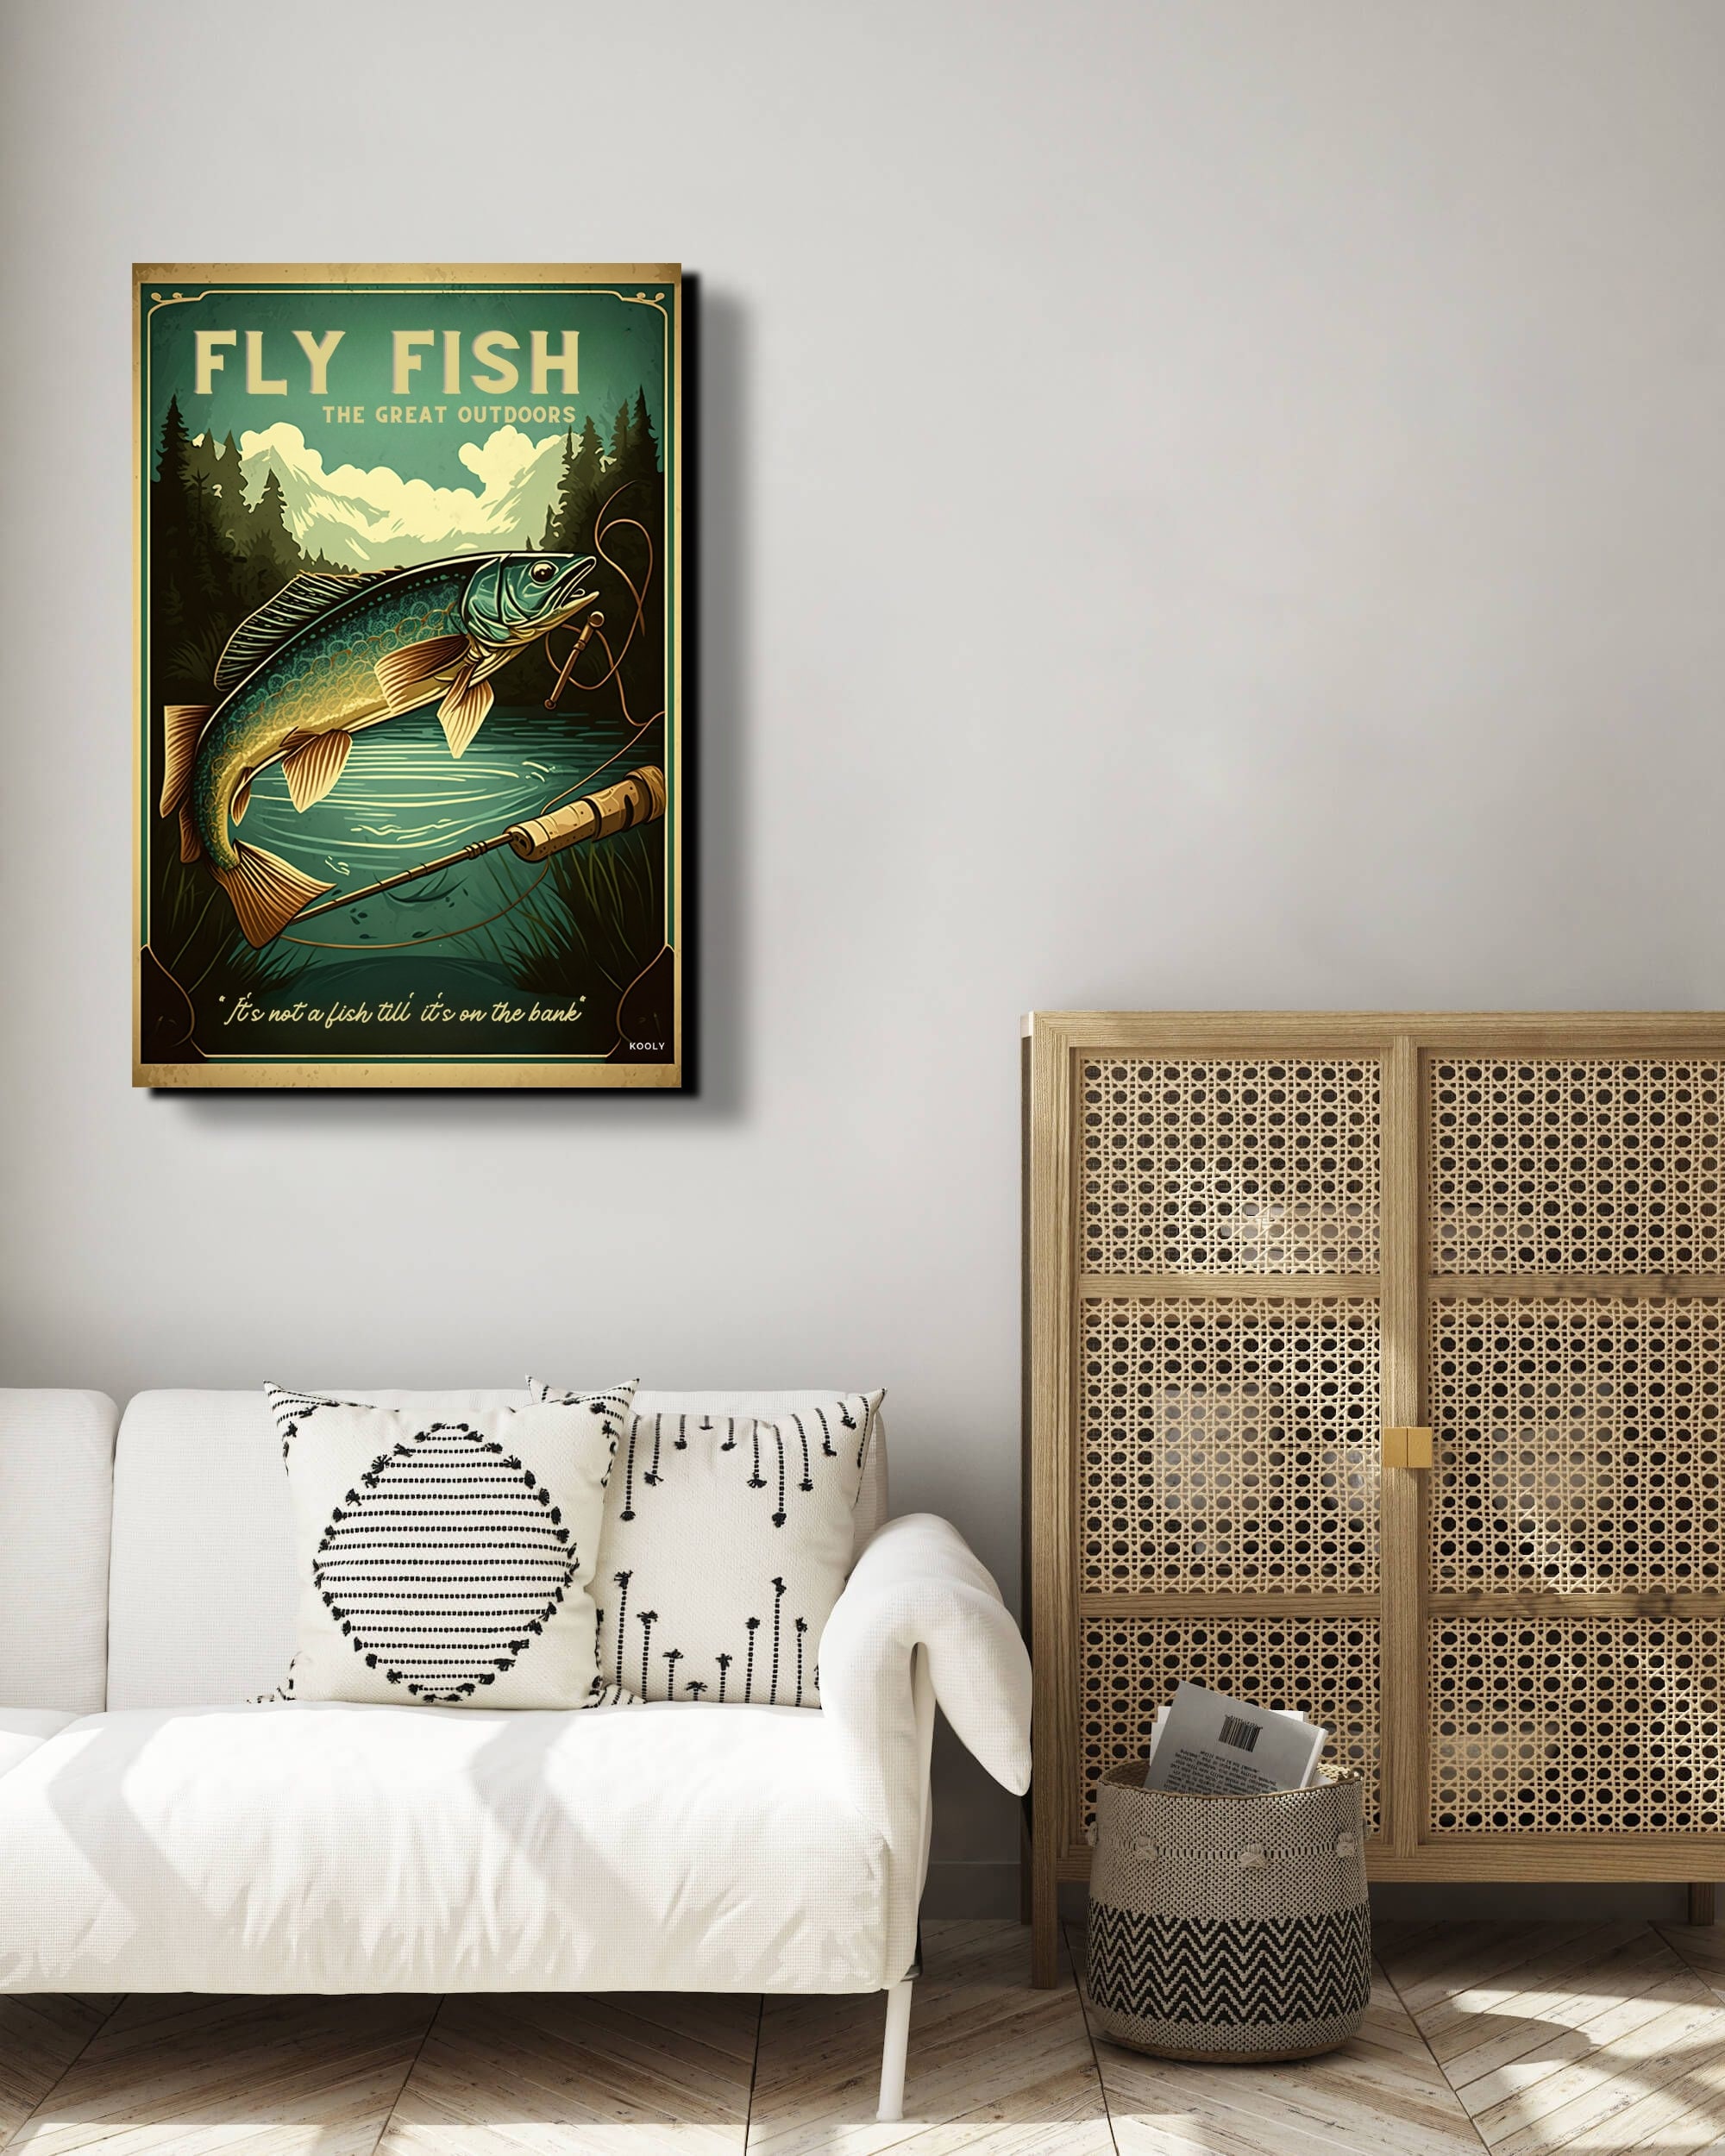 Fly Fishing Equipment On Deck with A Vintage Look | Large Solid-Faced Canvas Wall Art Print | Great Big Canvas